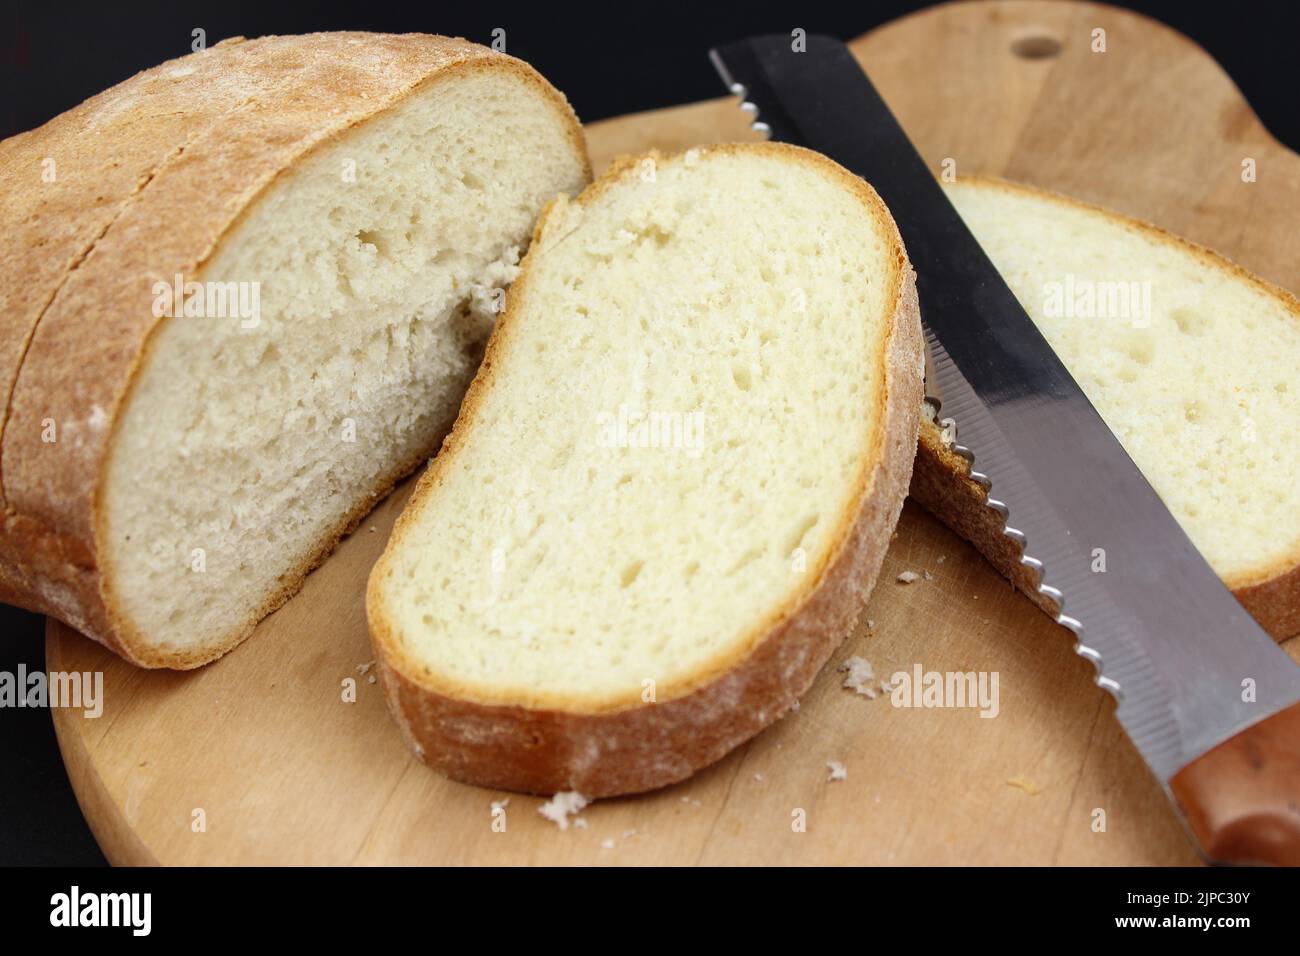 Wooden cutting board with sliced white bread and knife on black background Stock Photo